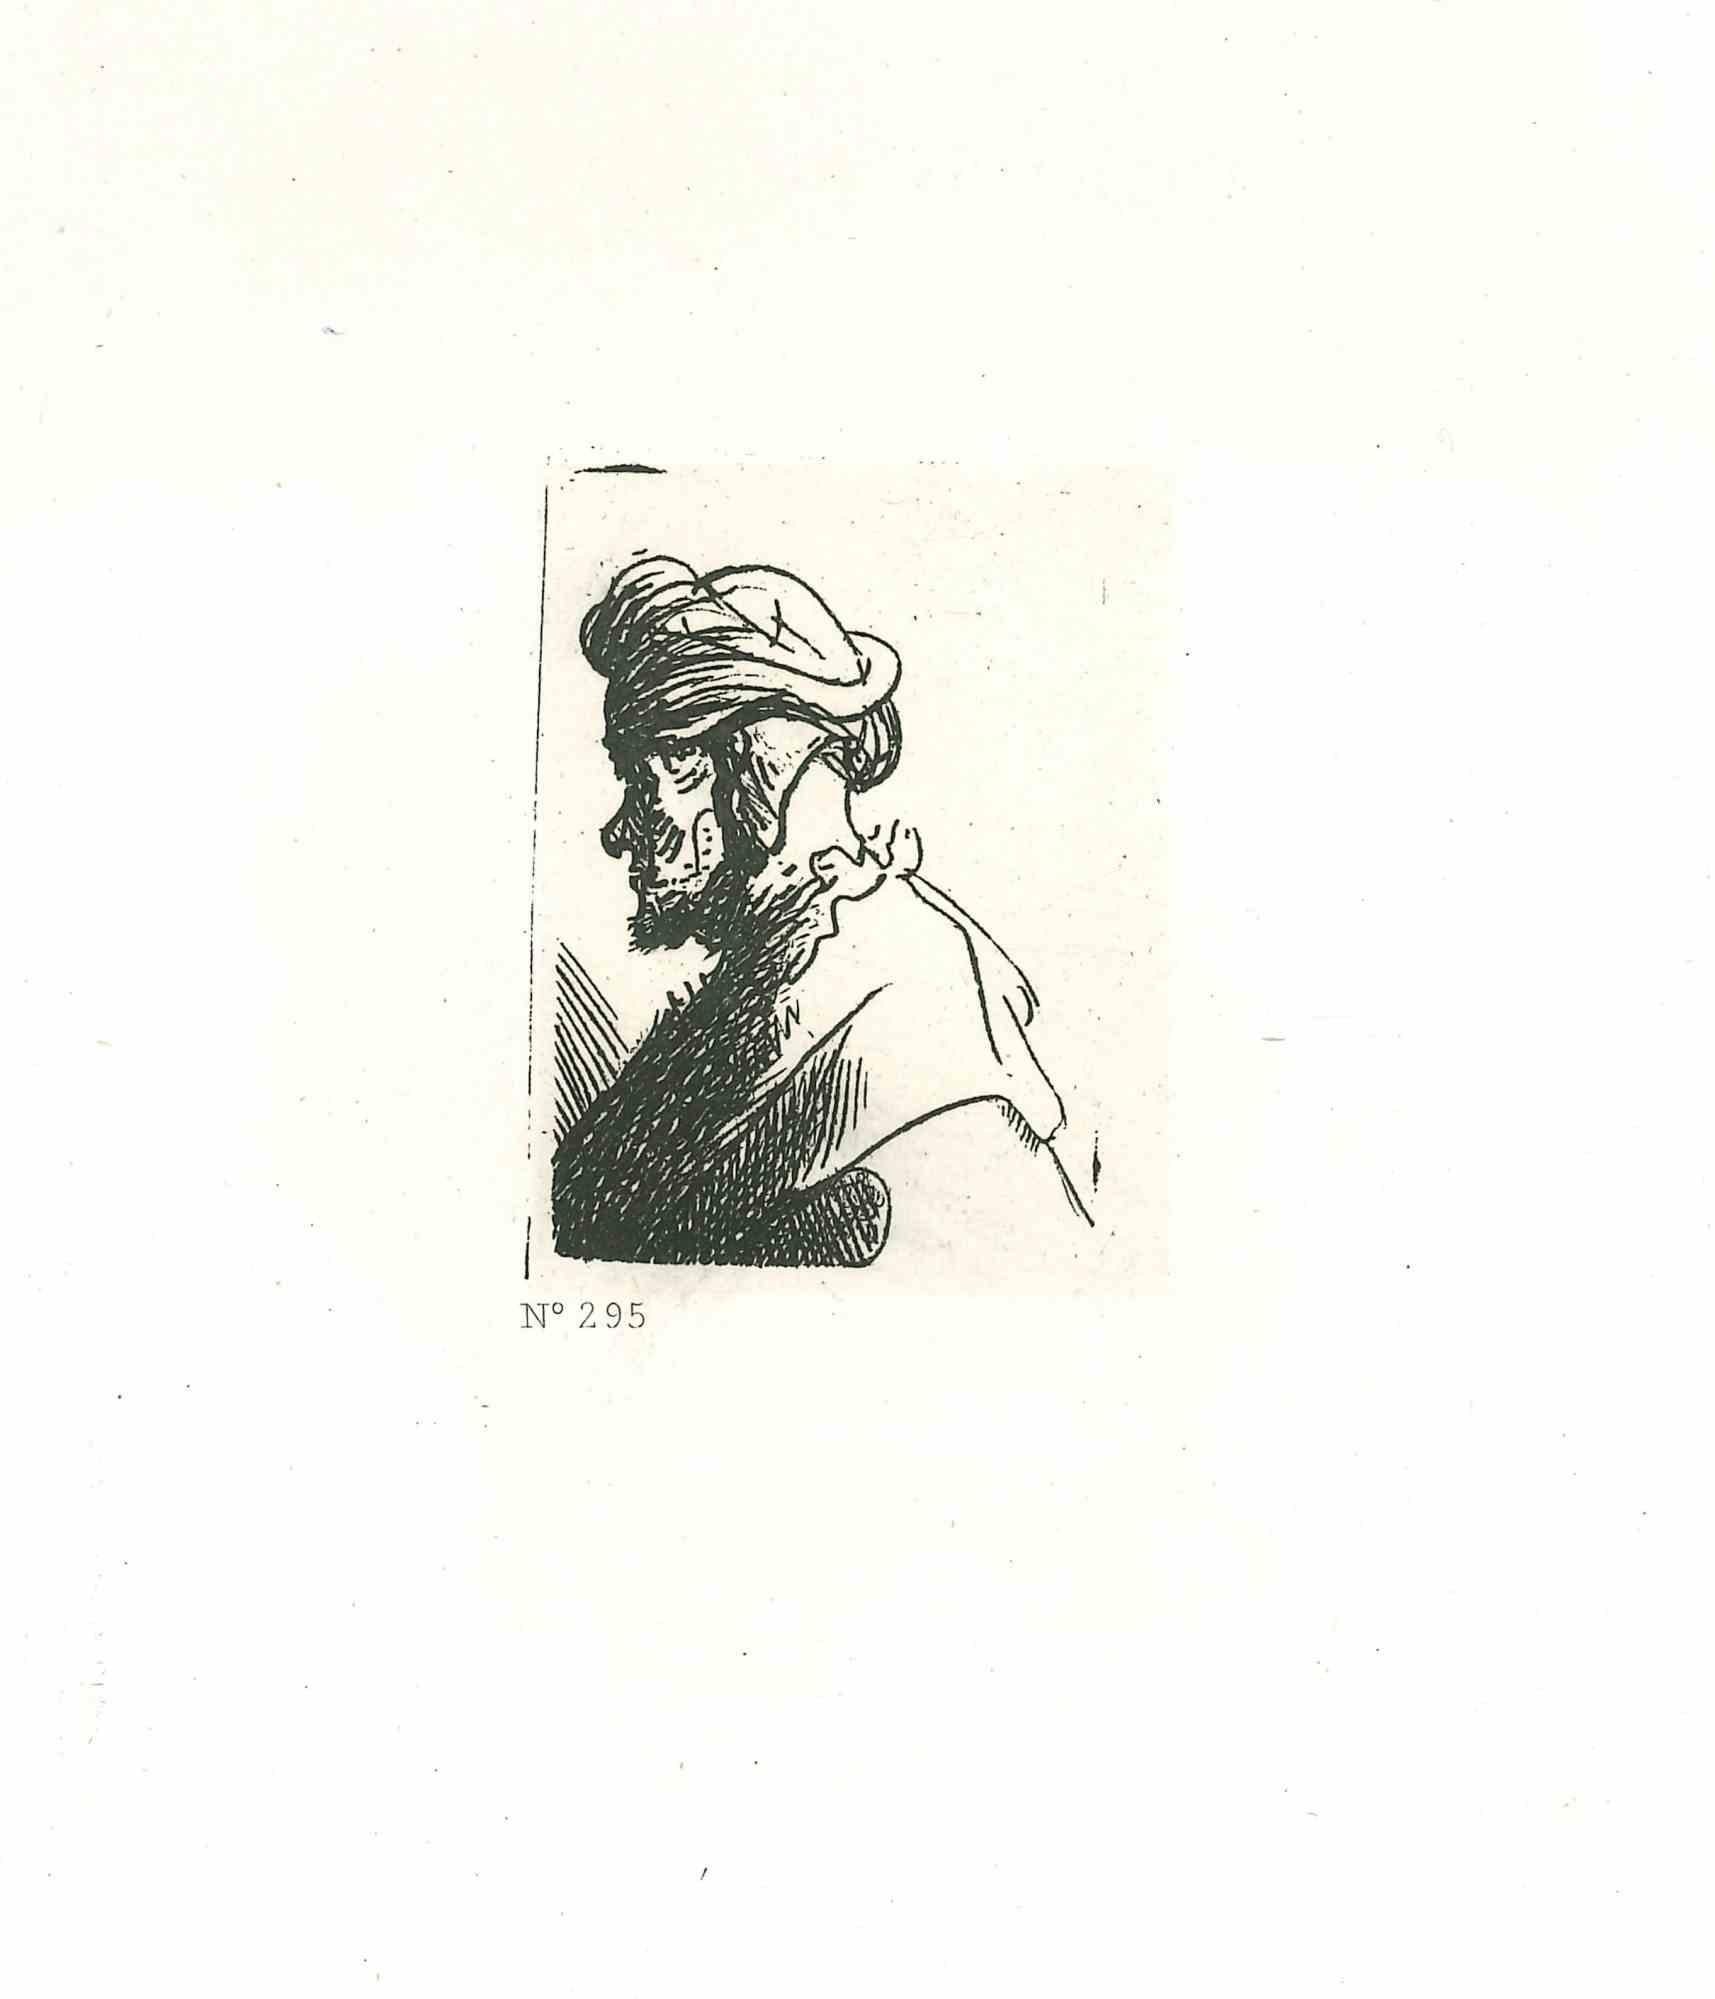 D'Après Rembrandt Figurative Print - Man in Hat with Earflaps  - Etching after Rembrandt - 19th Century